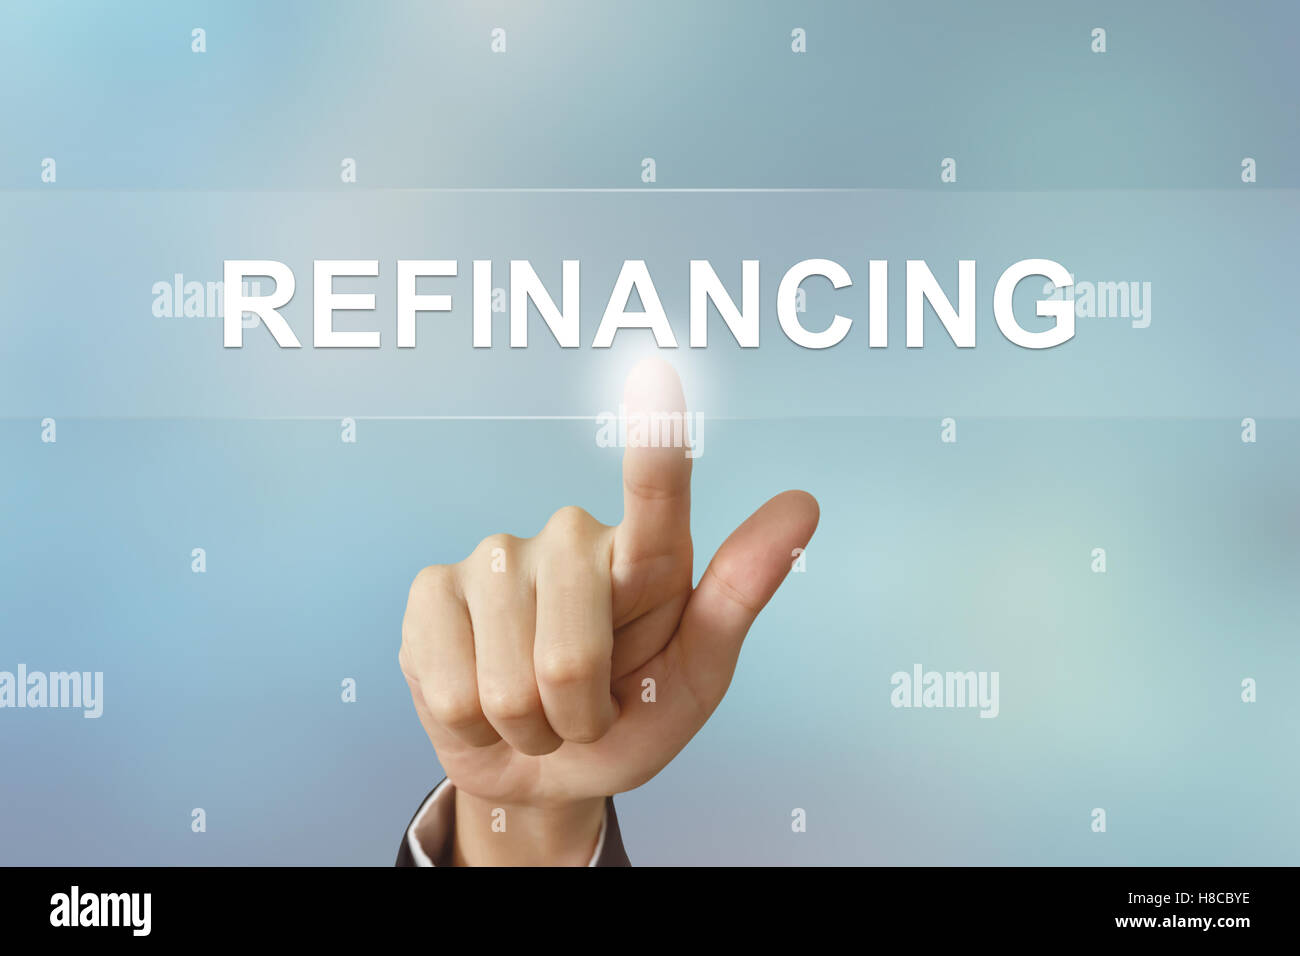 business hand pushing refinancing button on blurred background Stock Photo